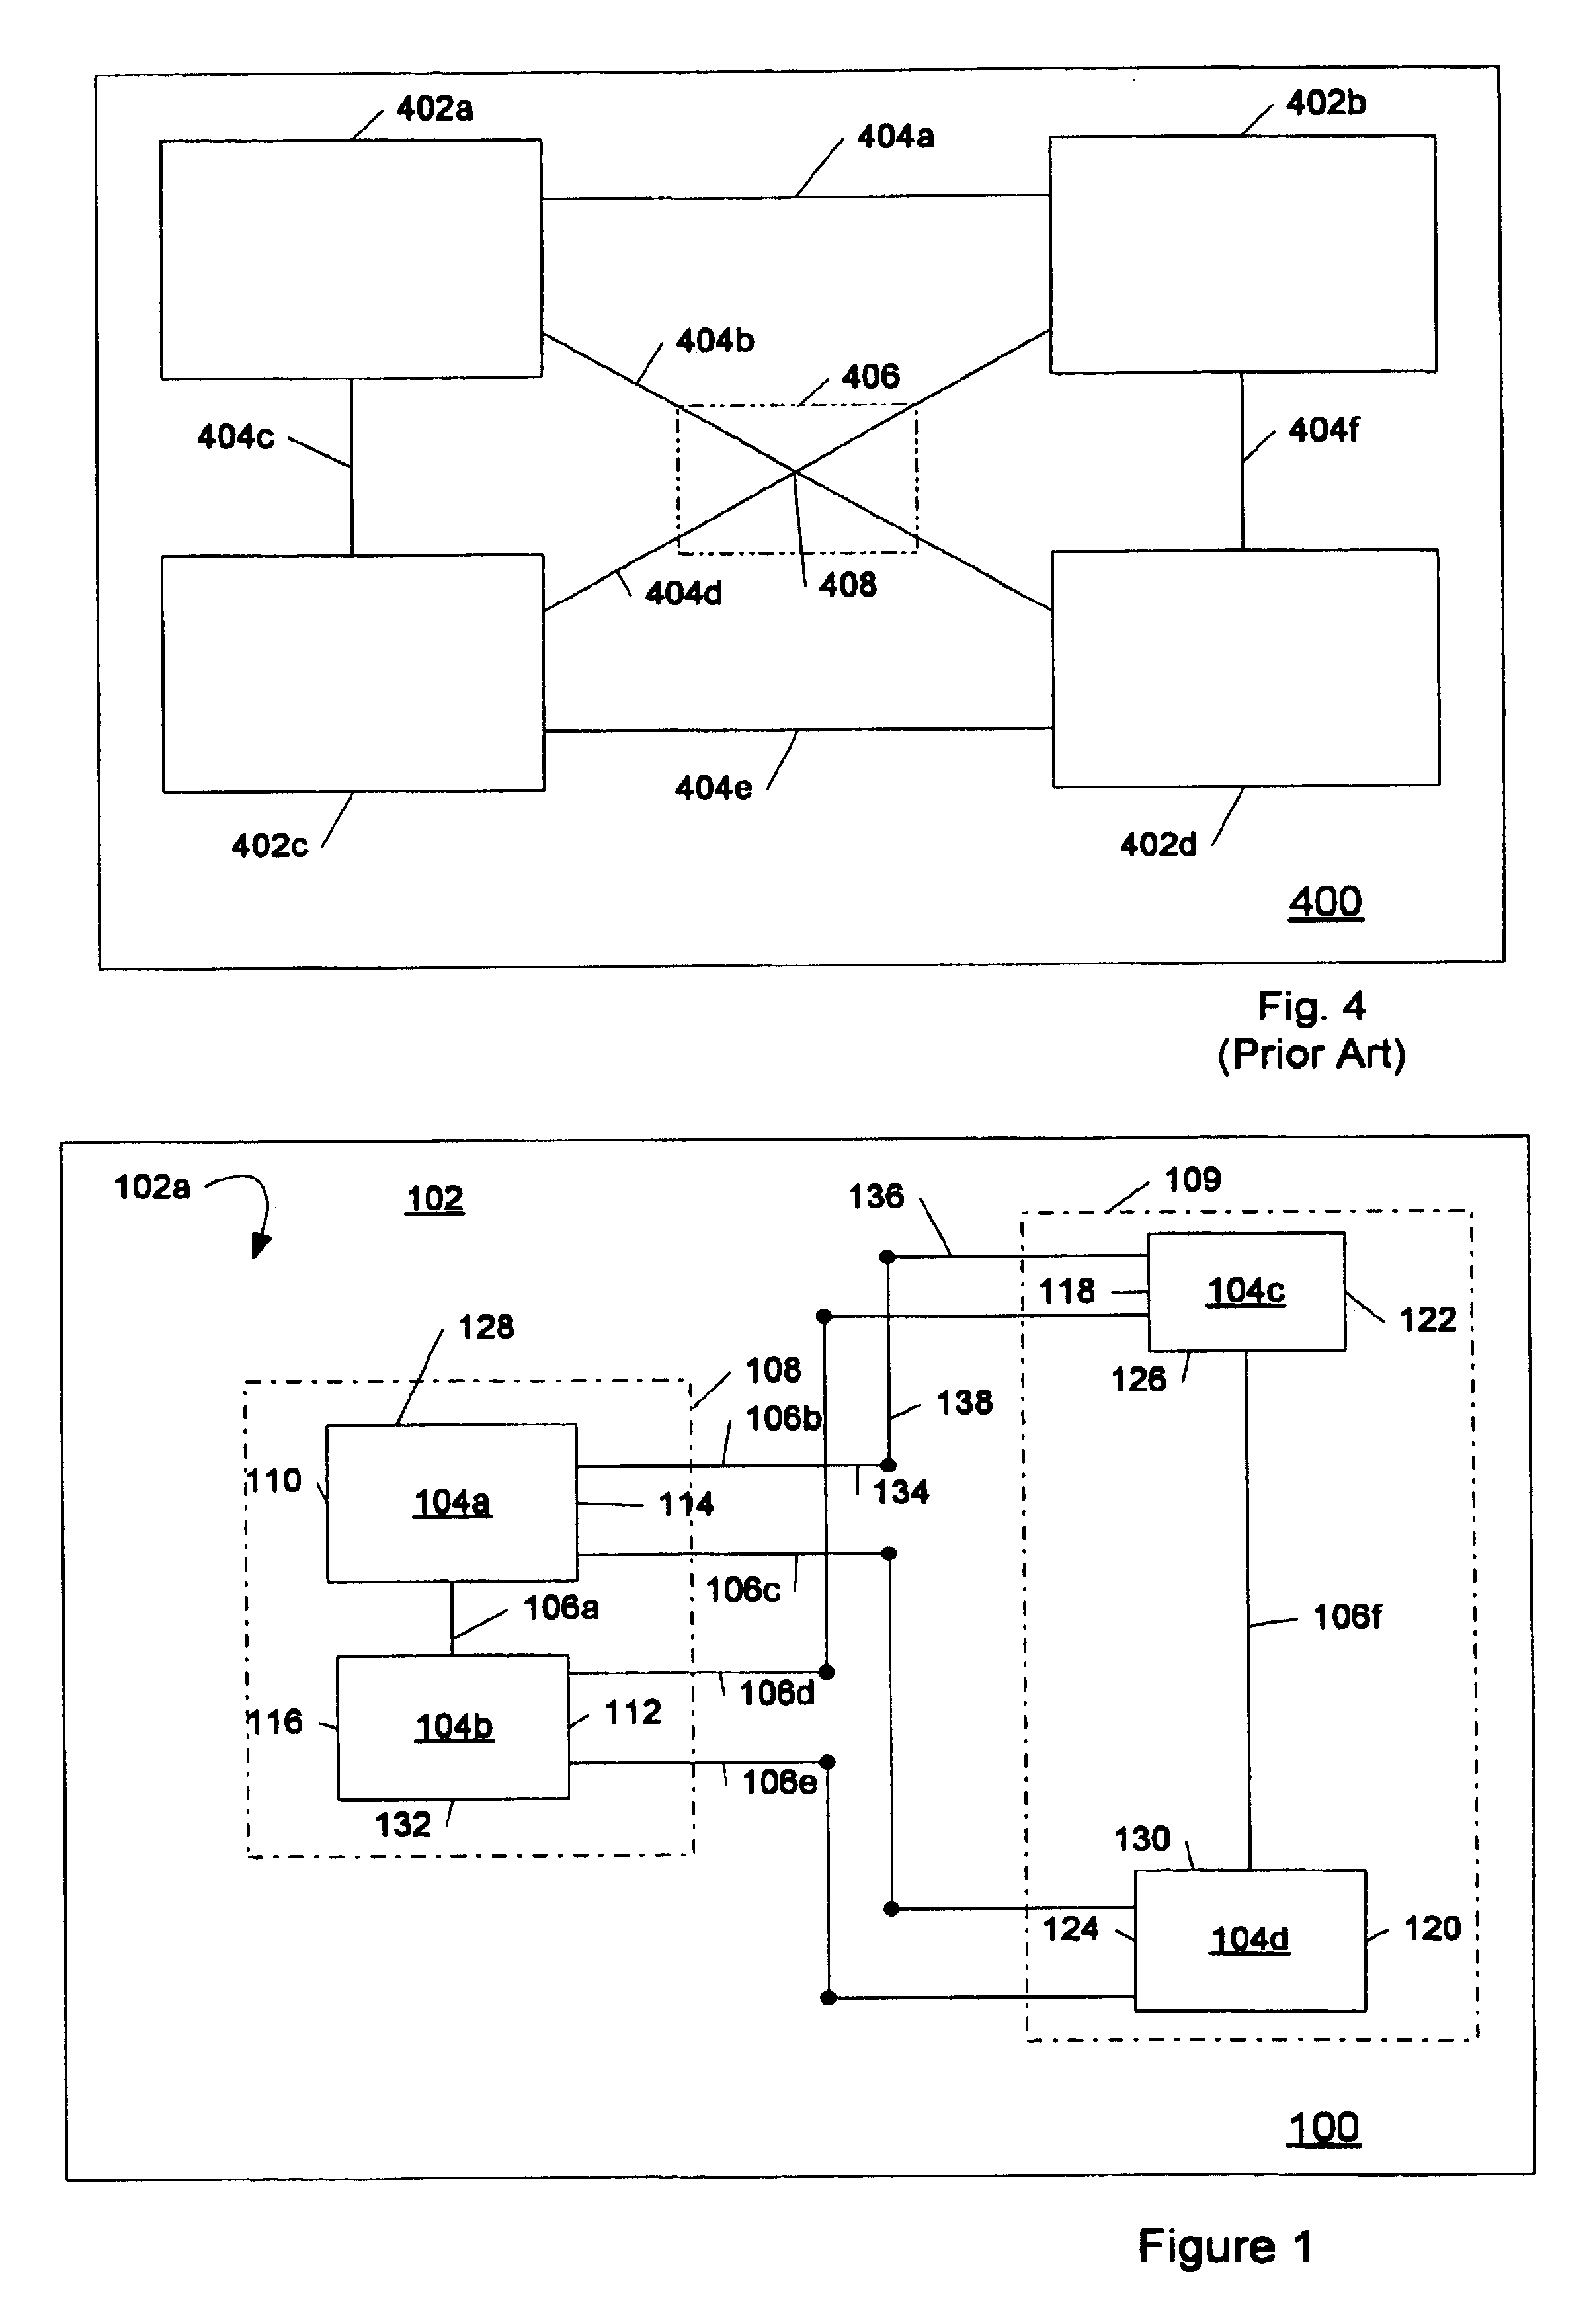 PCB component placement and trace routing therebetween